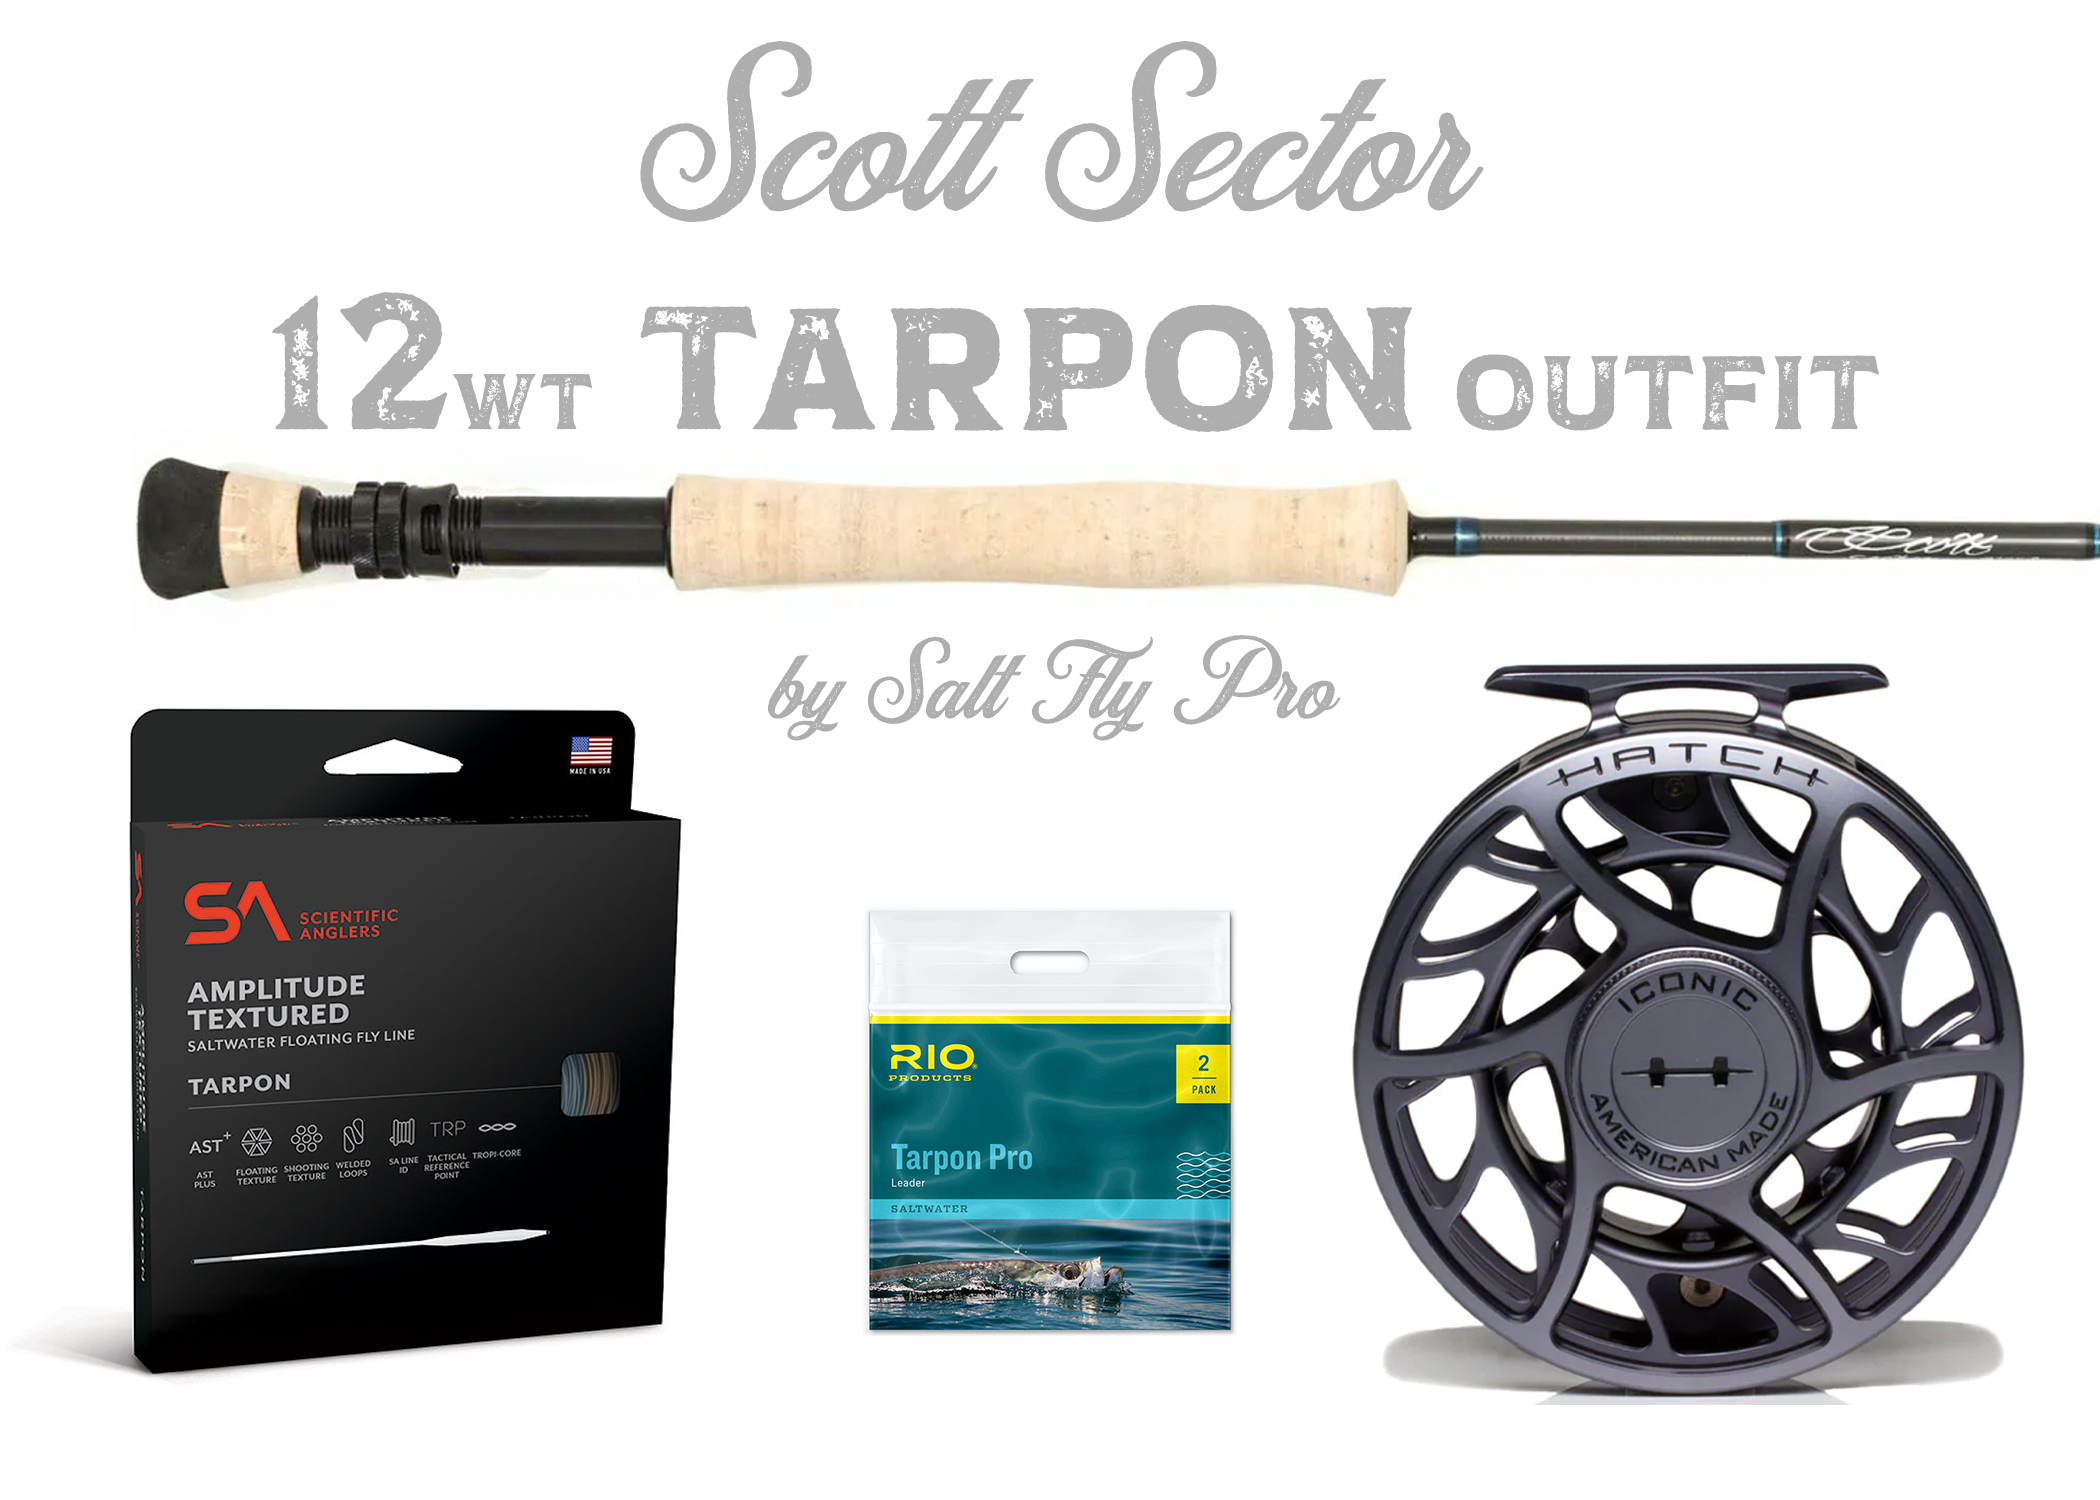 Scott Sector 12wt TARPON Outfit Combo - NEW!